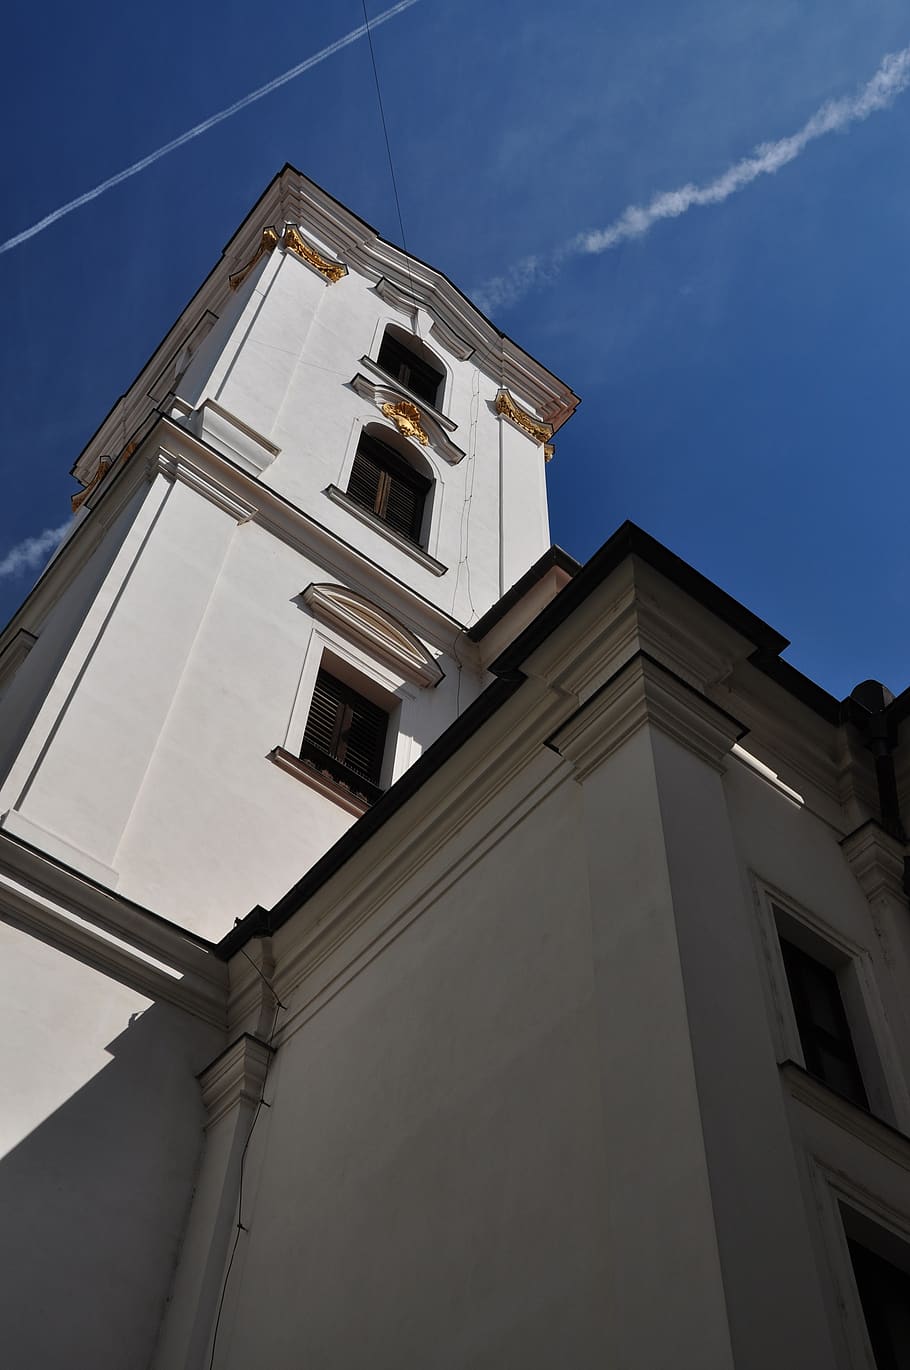 brno, church, tower, steeple, monument, sacral, low angle view, built structure, architecture, building exterior